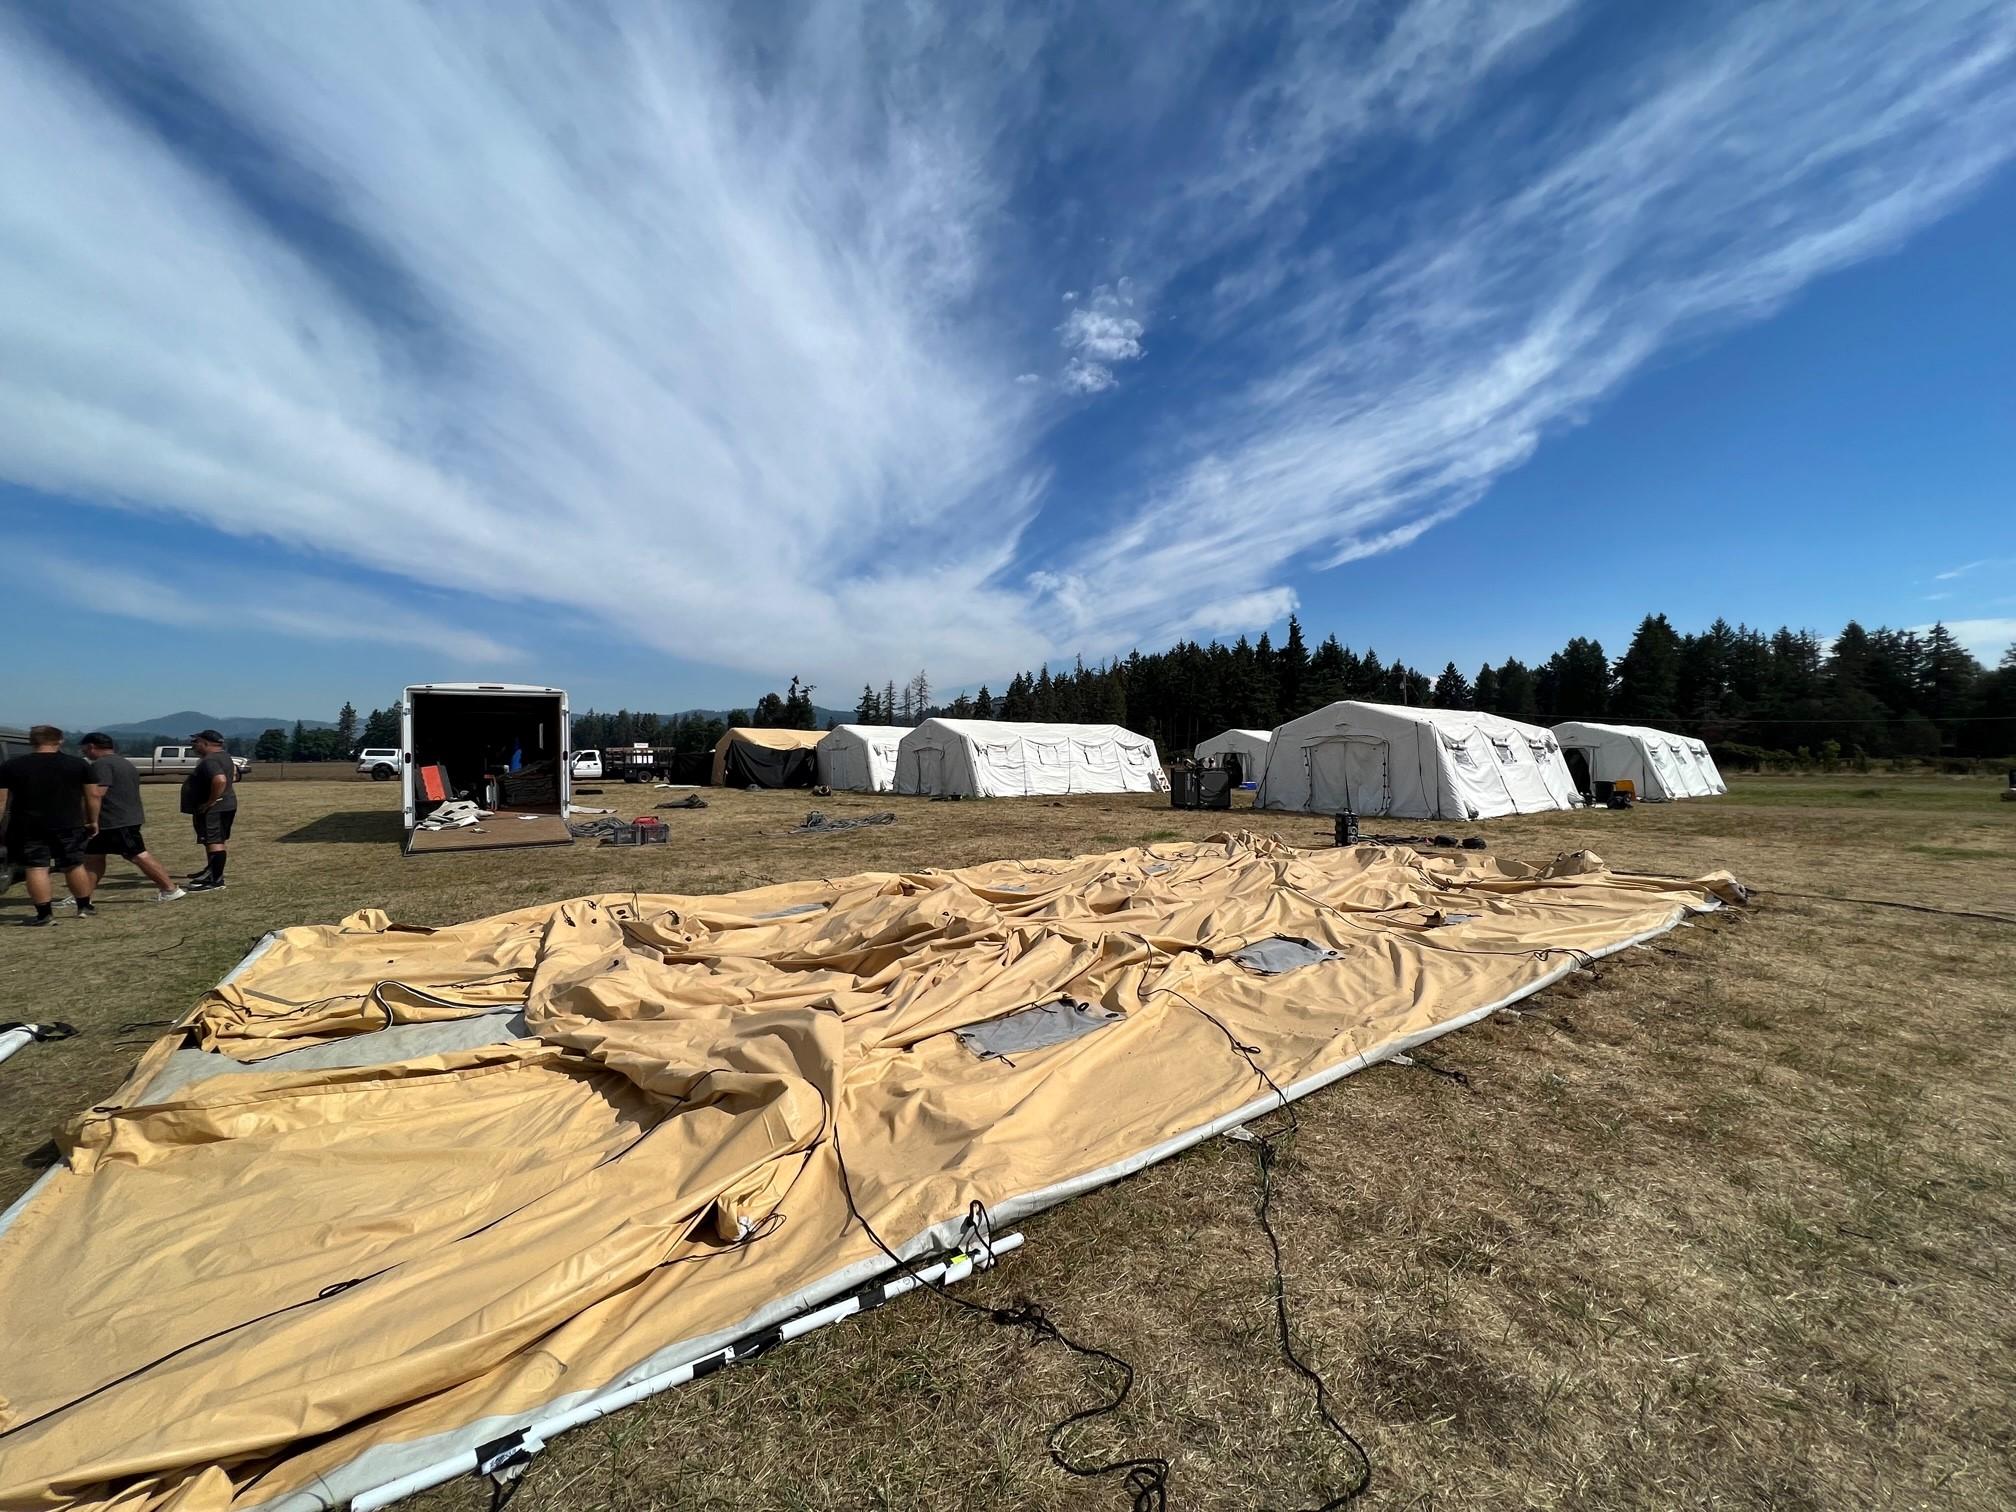 This is a photo of tents and yurts being assembled